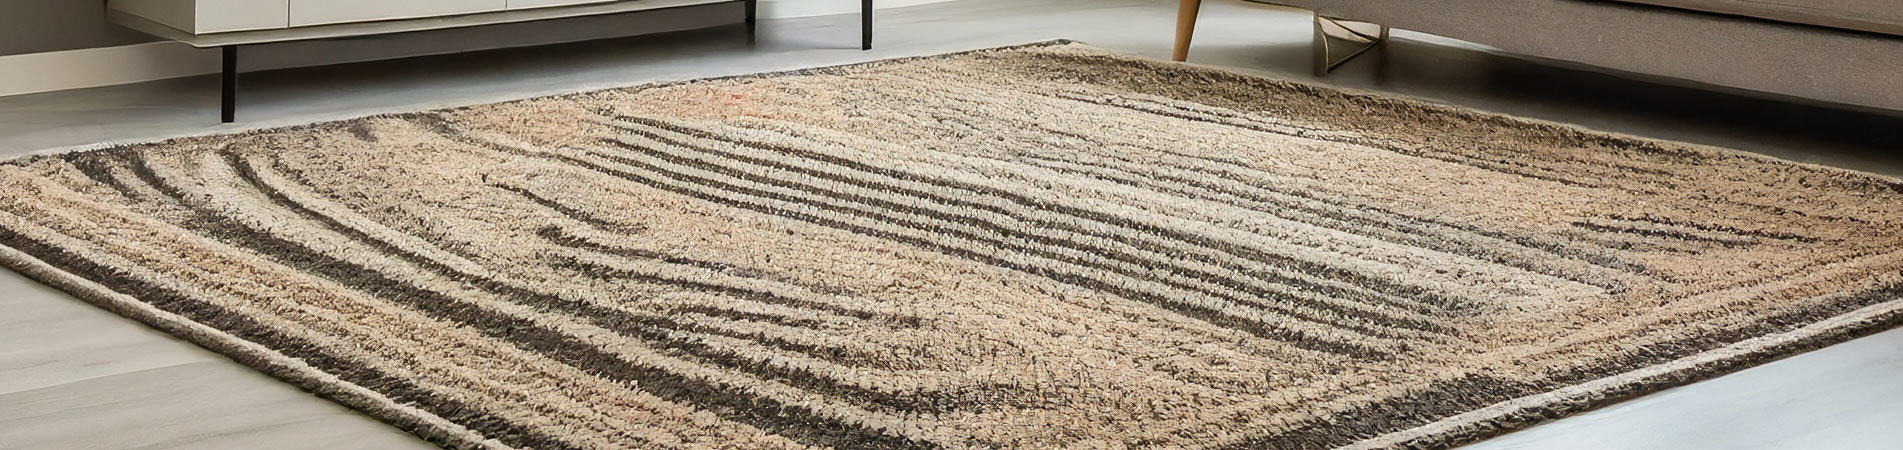 New Jersey’s Best Wool Rug Restoration Services – Call Us Today!